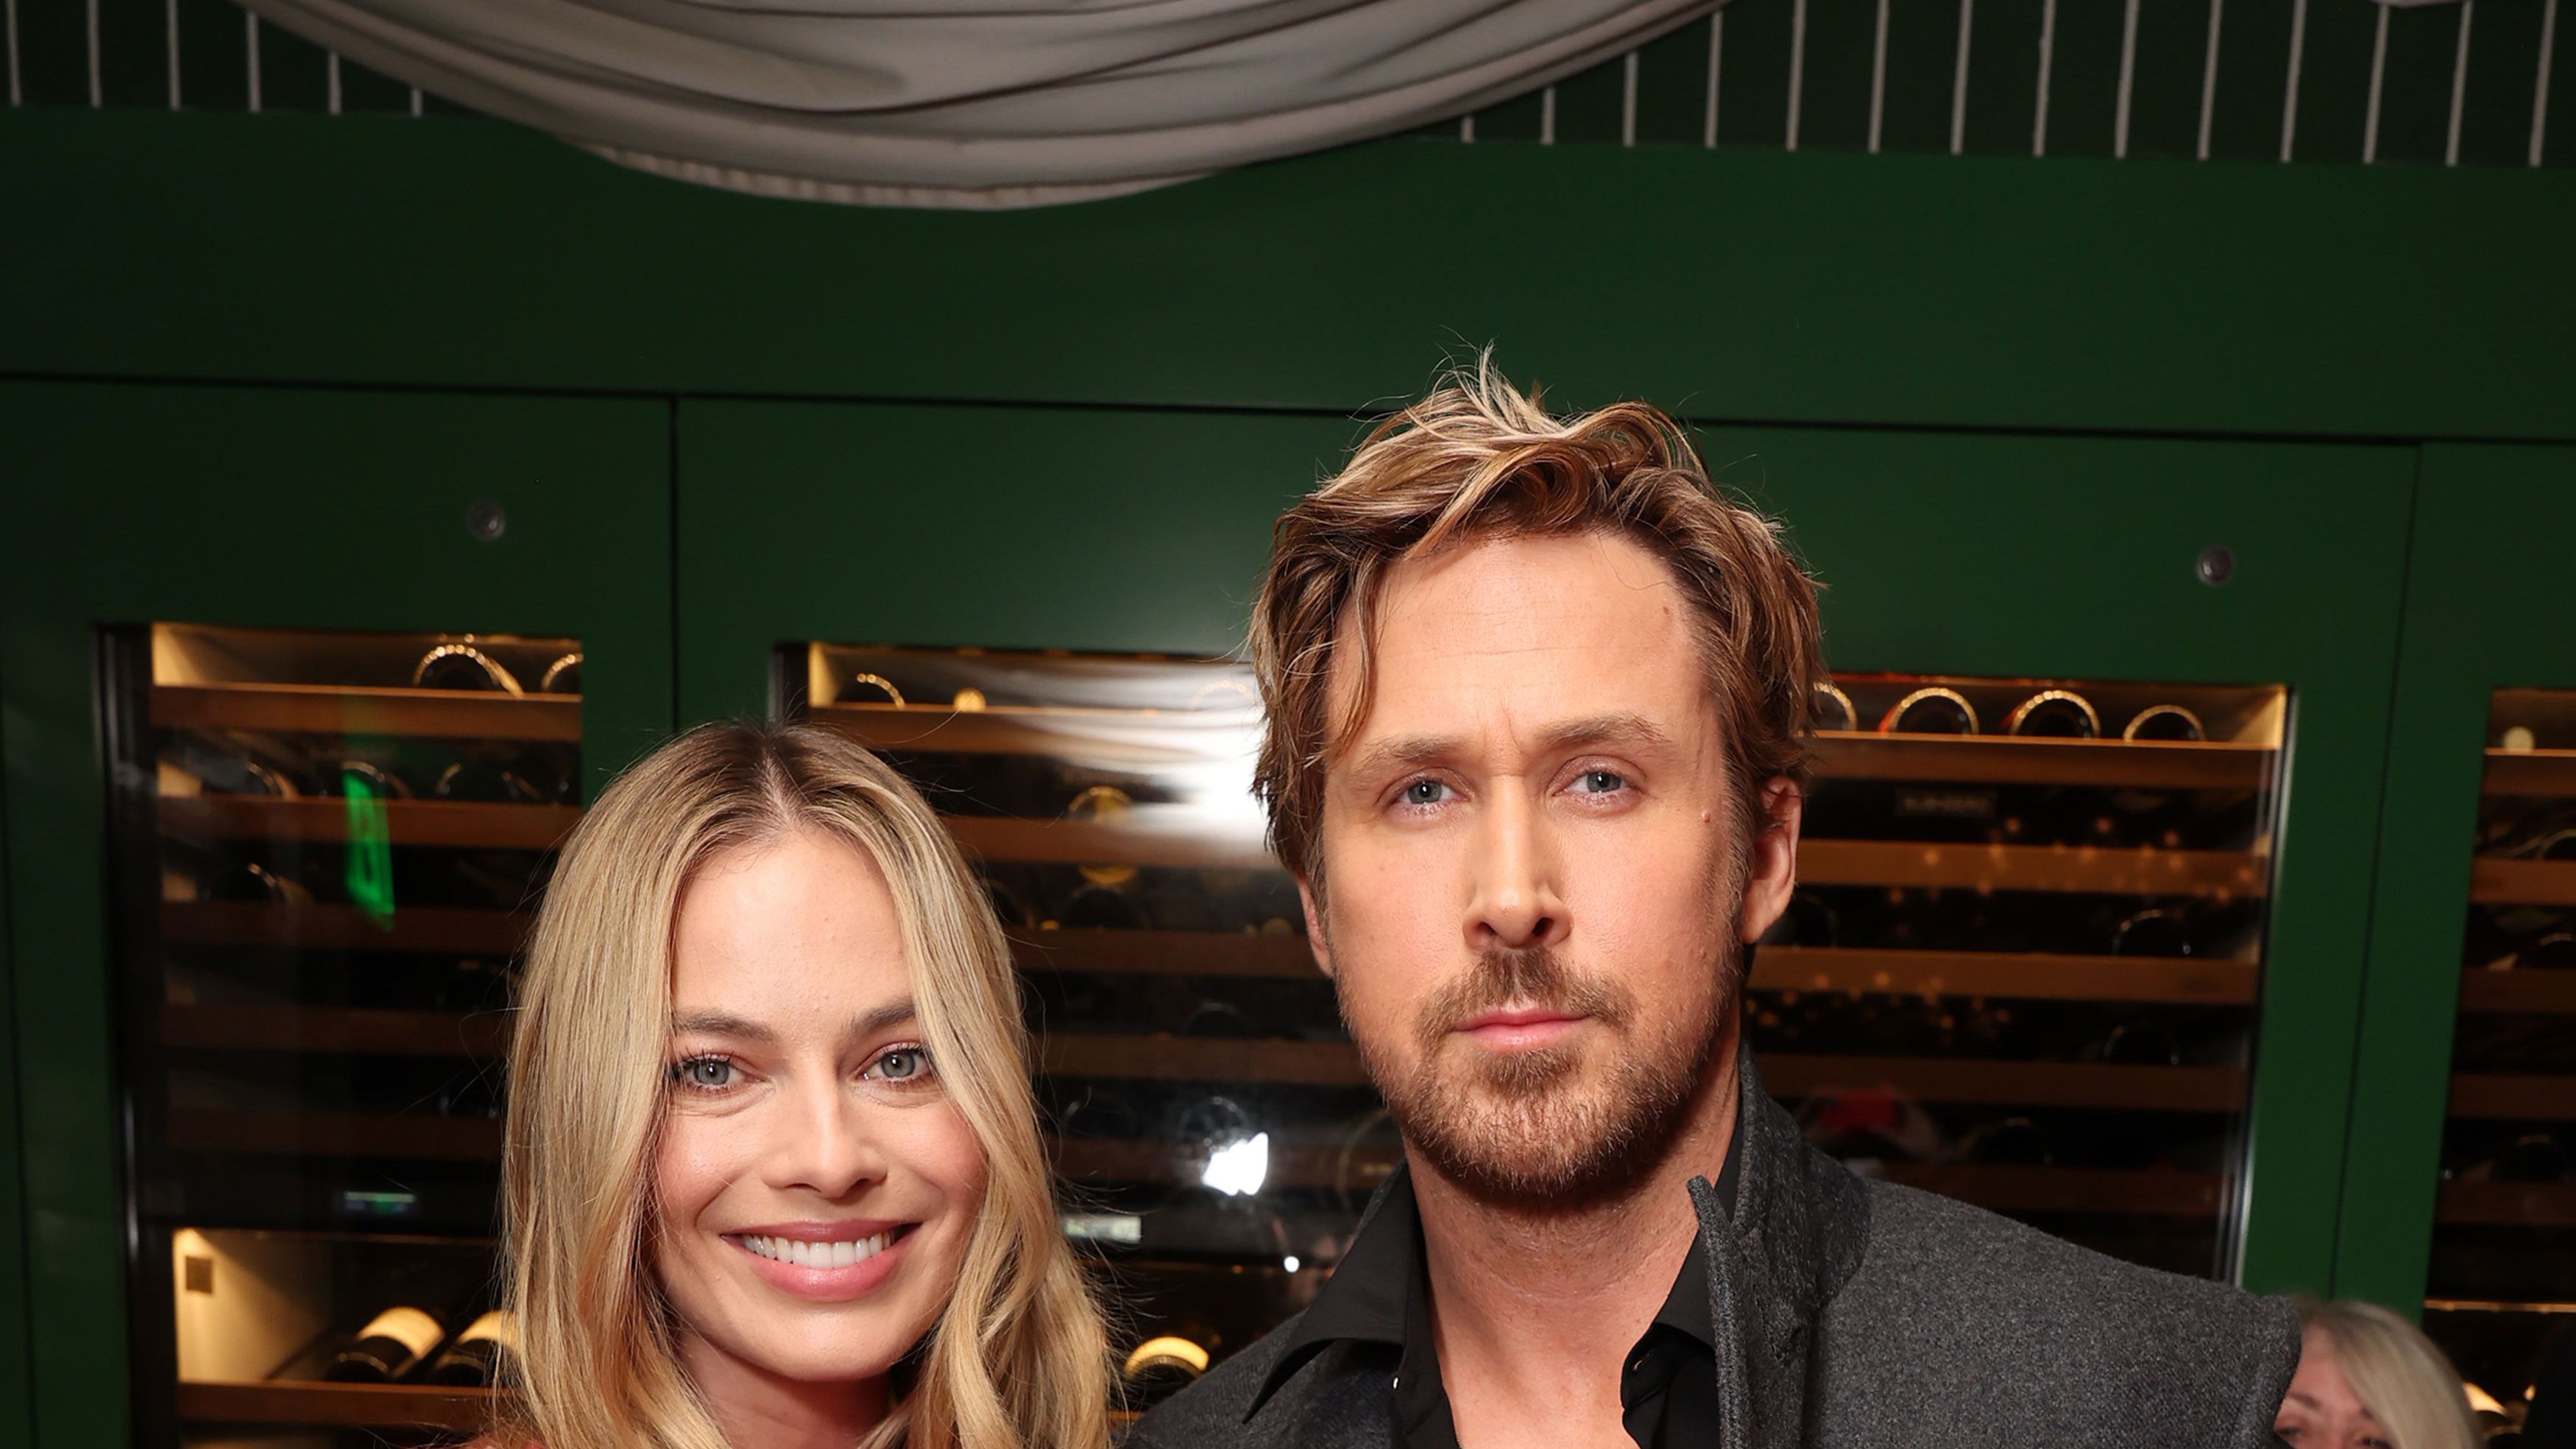 Margot Robbie Bought Ryan Gosling Many Gifts While Filming Barbie